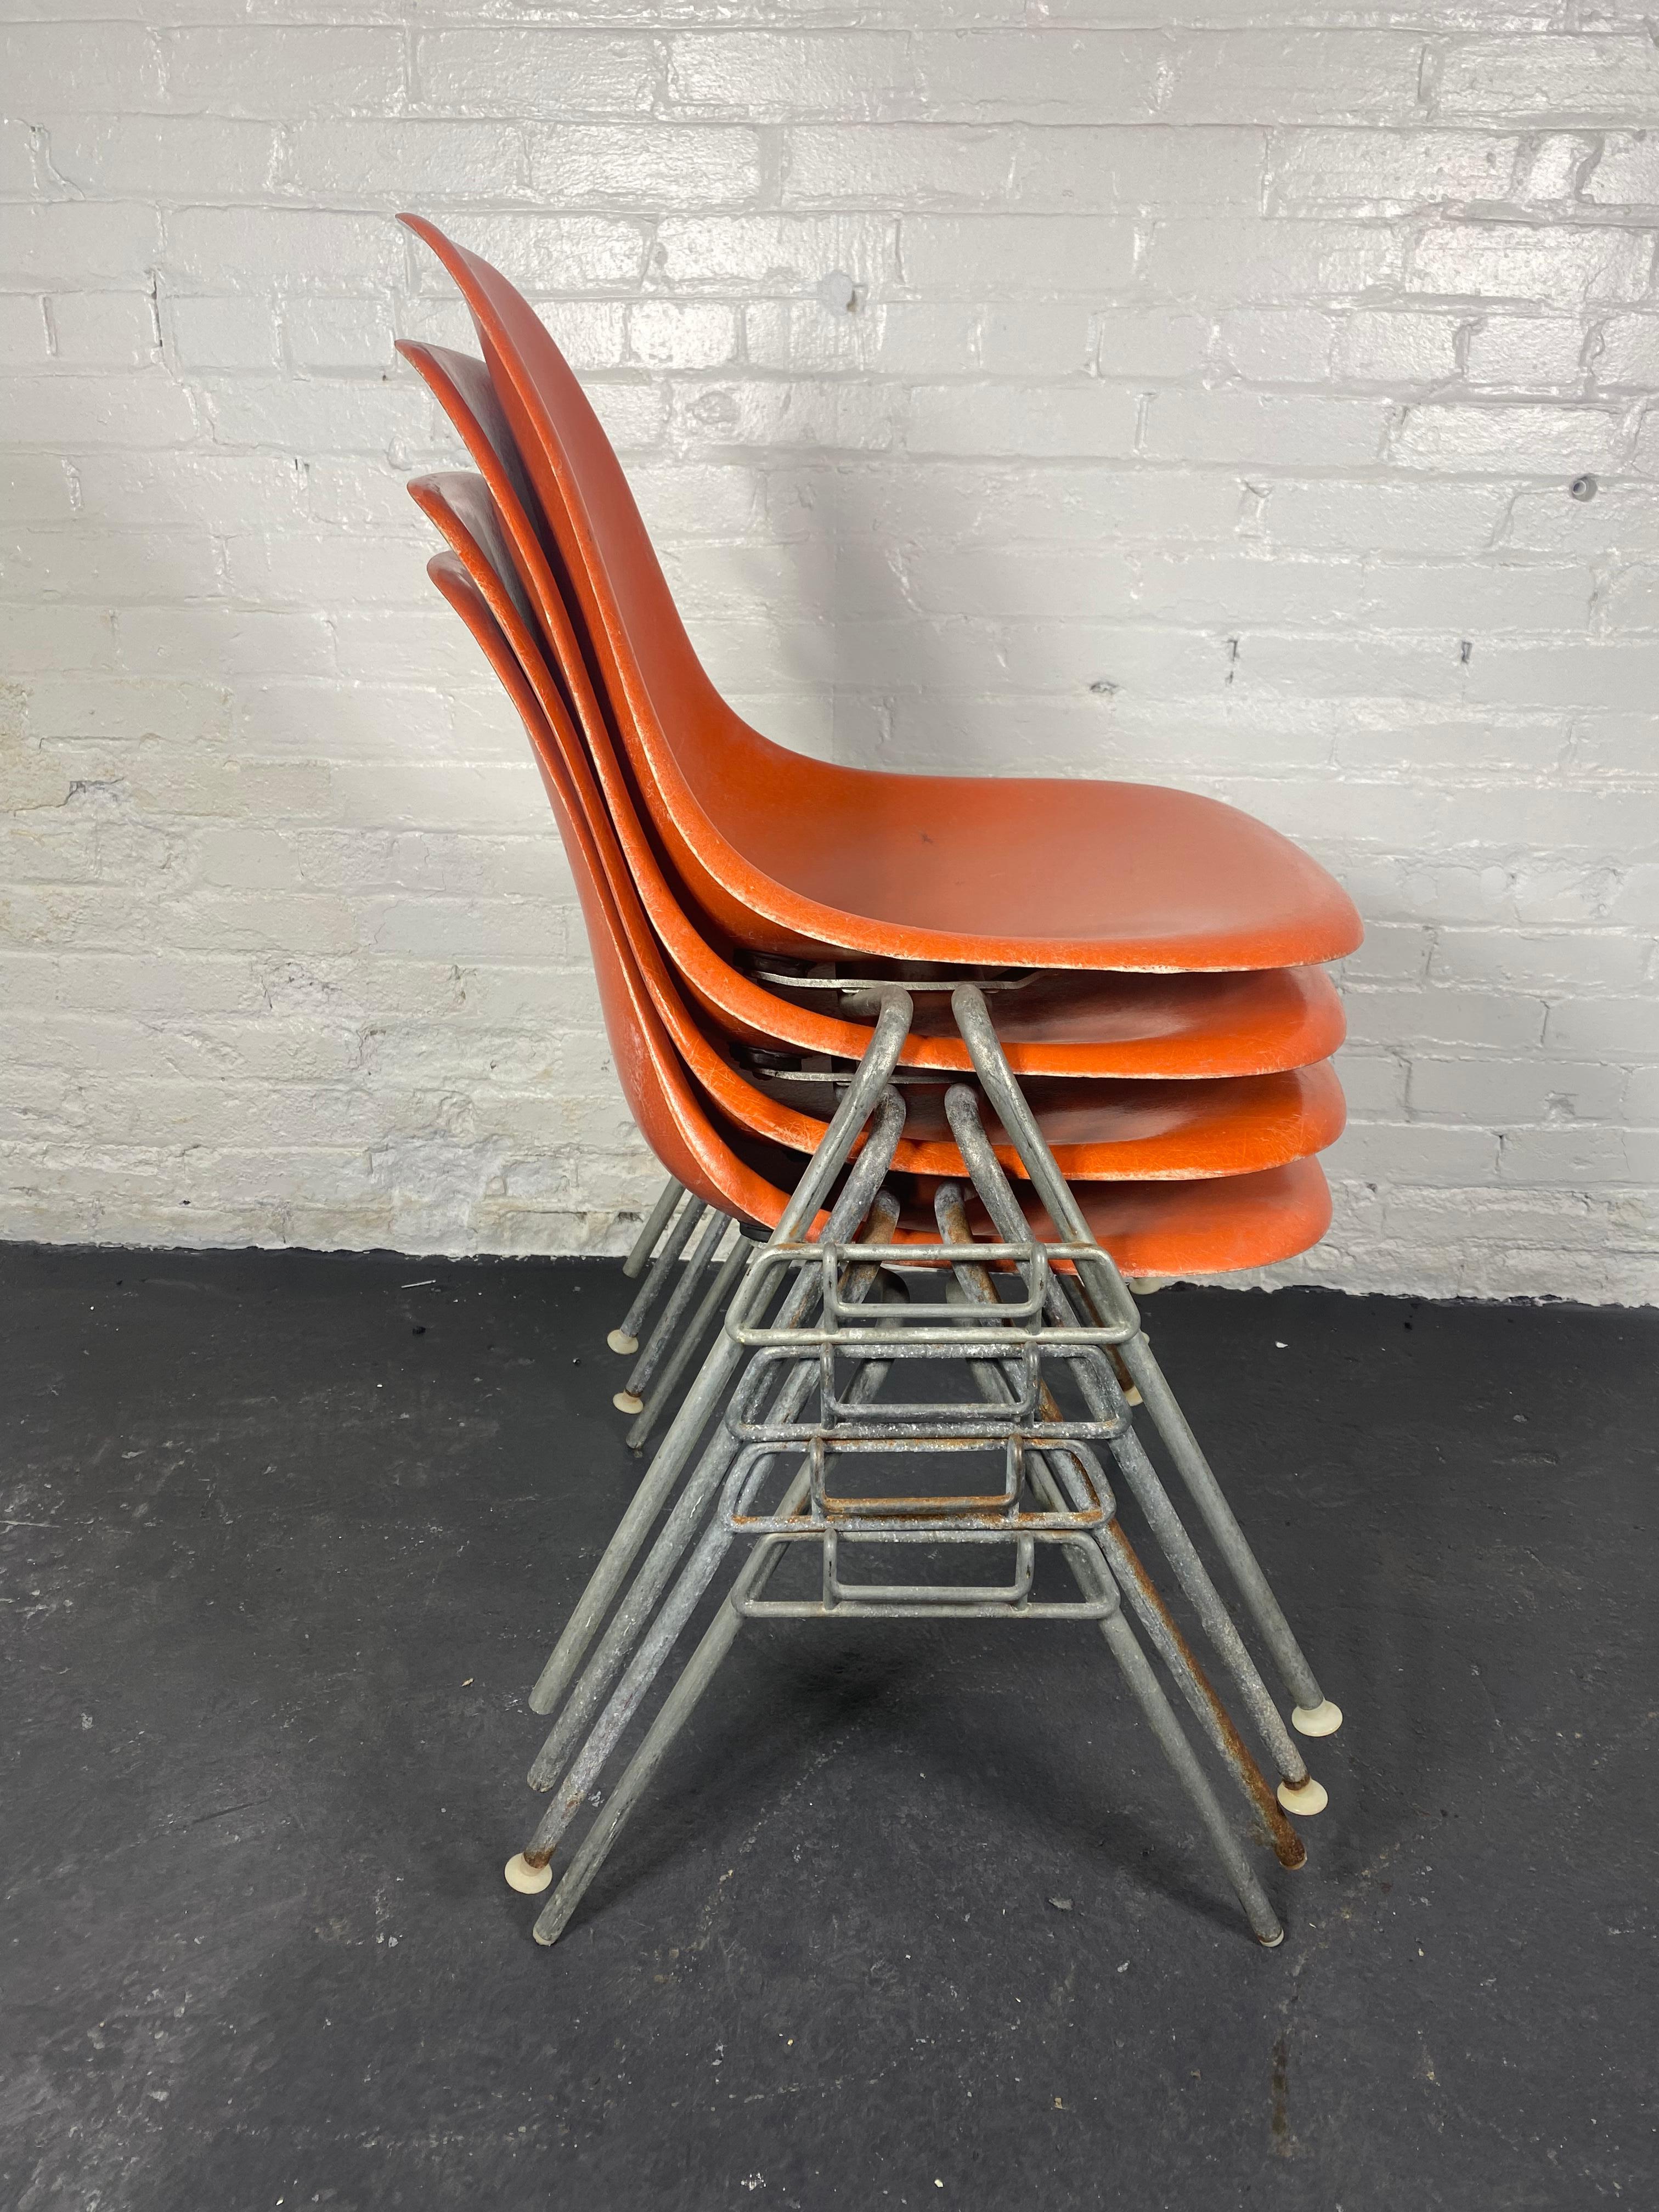 Great Set of 4 stackable dining room chairs by Charles & Ray Eames for Herman Miller, cLASSIC mID cENTURY Modern design.. , circa 1970 (late 1960s 
The chairs are marked on the underside with 'herman miller'.
A molded orange fiberglass glass shell